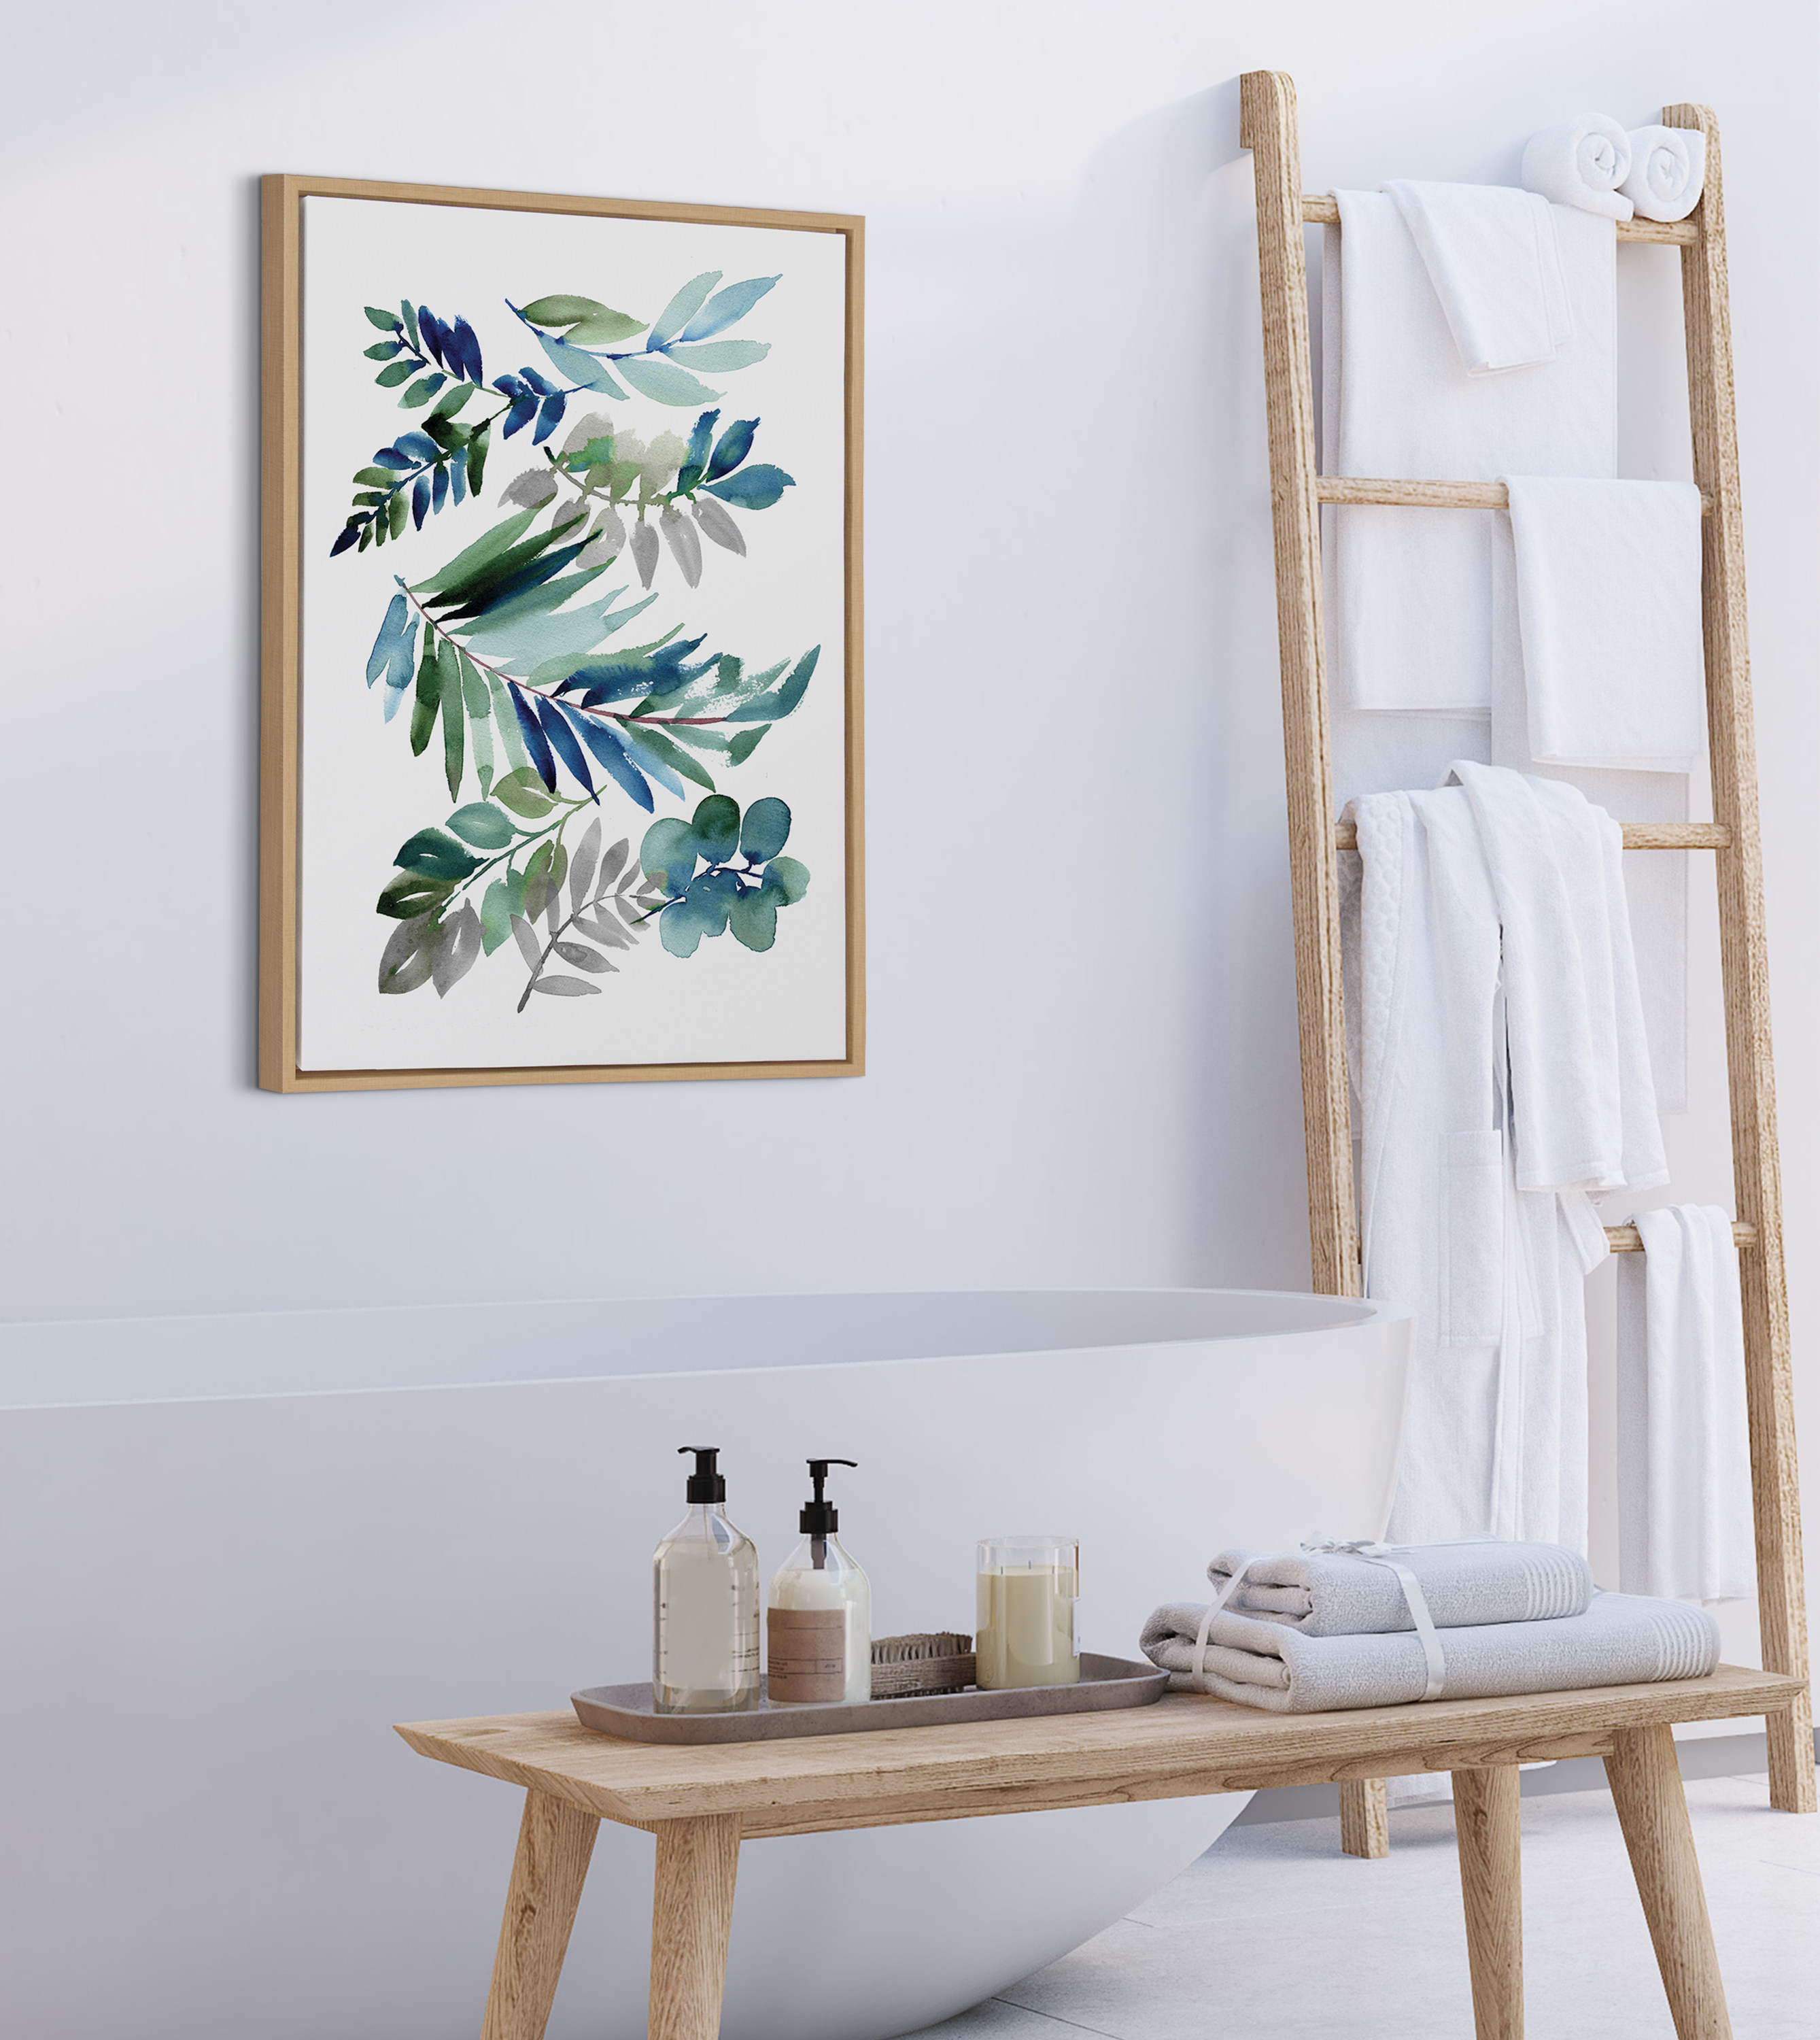 Kate and Laurel Sylvie Tropic Leaves Blue Framed Canvas Wall Art by Sara  Berrenson 23x33 Natural Watercolor Floral Home Decor